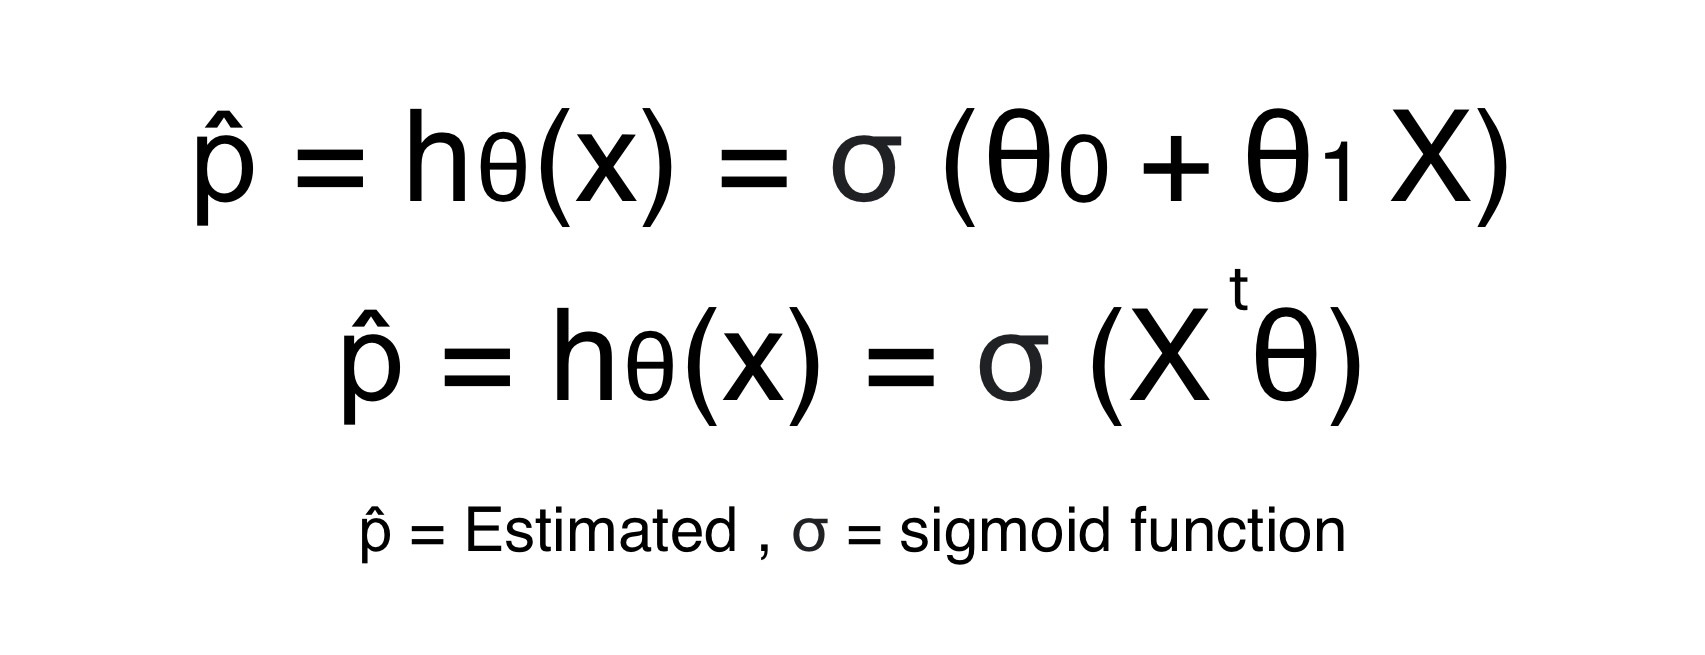 this image shows Formula to calculate the probability in logistic regression in machine learning.